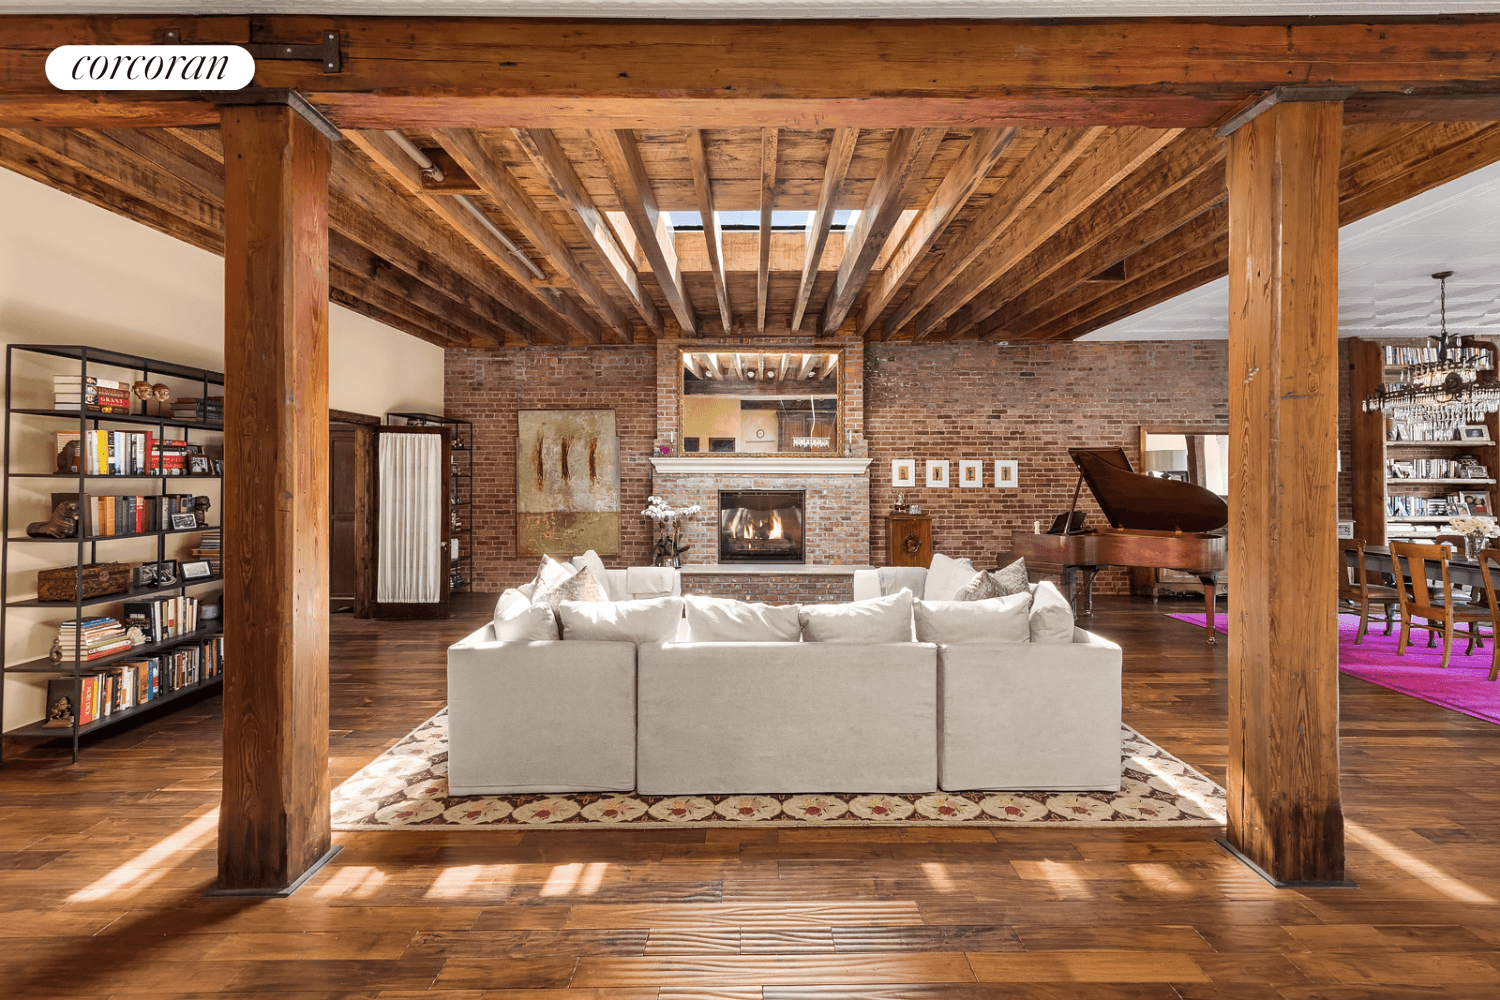 This one of a kind penthouse is a stunning 4 bedroom, 3 bath loft perched atop an intimate and historic Tribeca building.